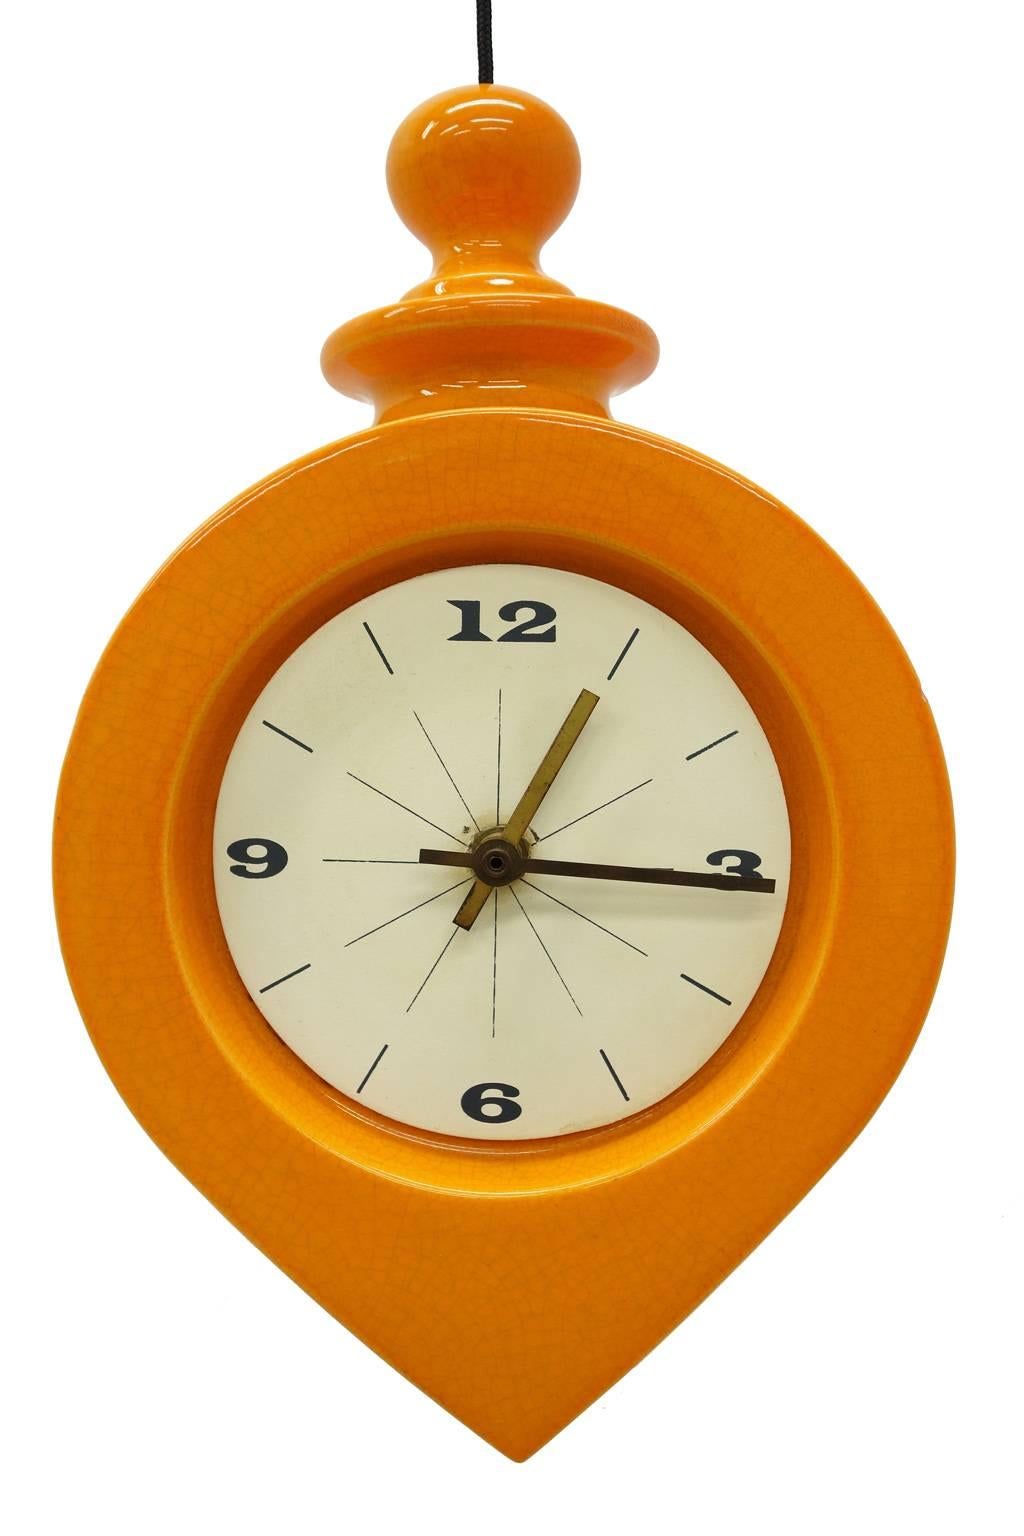 Amazing 1970s design hanging clock by Charles Chaney. Heavy ceramic with bright orange glaze. This clock can be wall-mounted or hang at adjustable heights. Comes with two extra interchangeable clock faces. Clock mechanism is made in Germany that